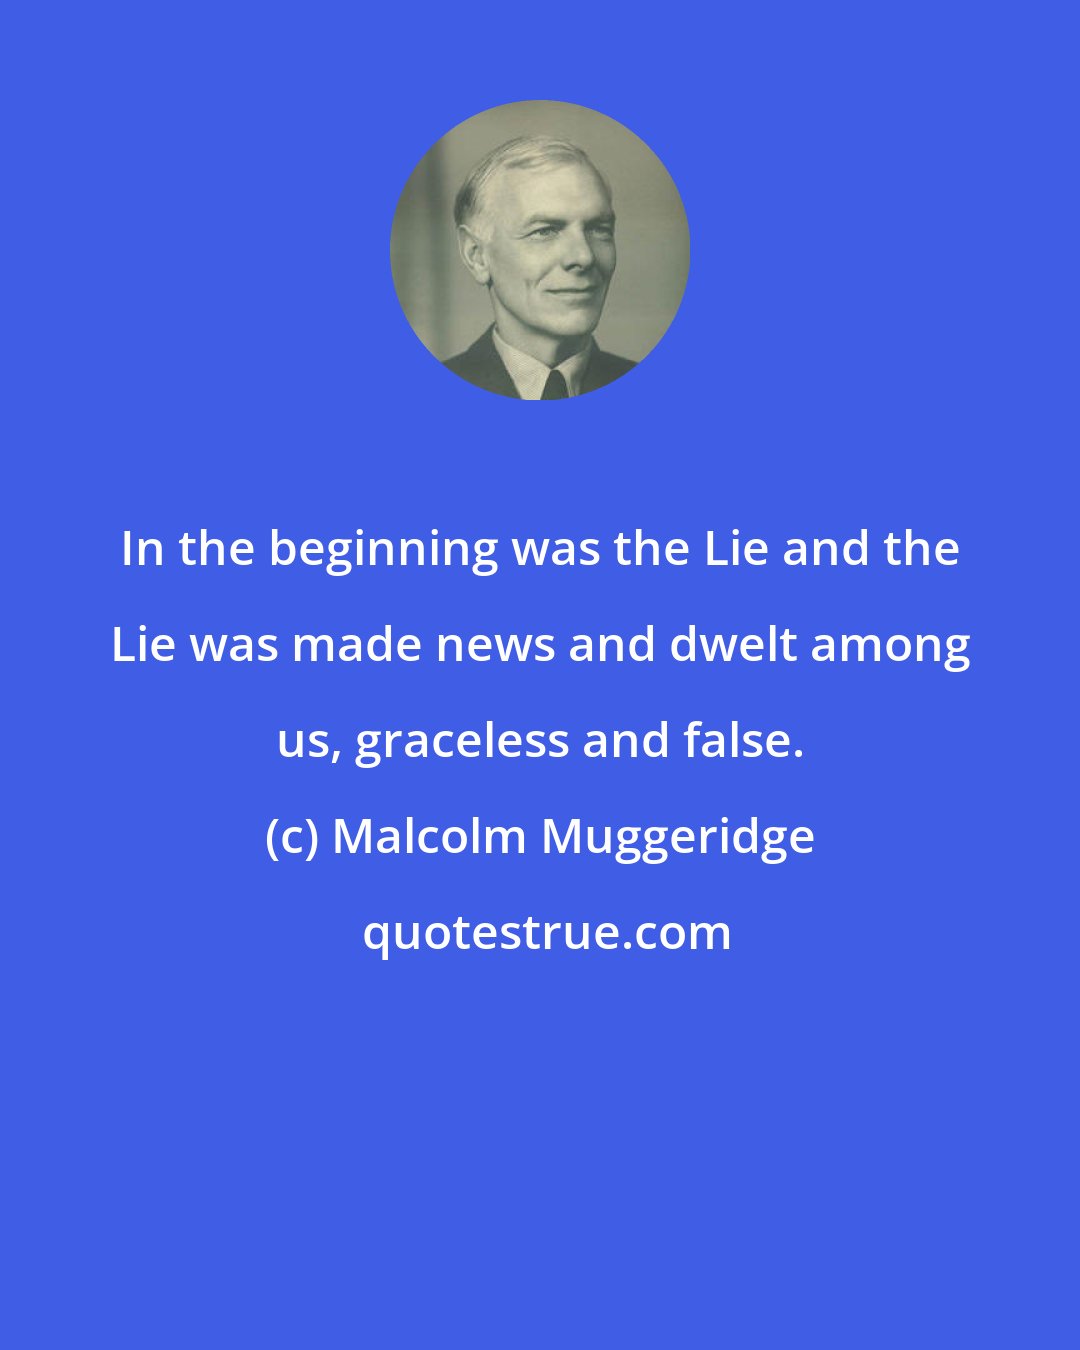 Malcolm Muggeridge: In the beginning was the Lie and the Lie was made news and dwelt among us, graceless and false.